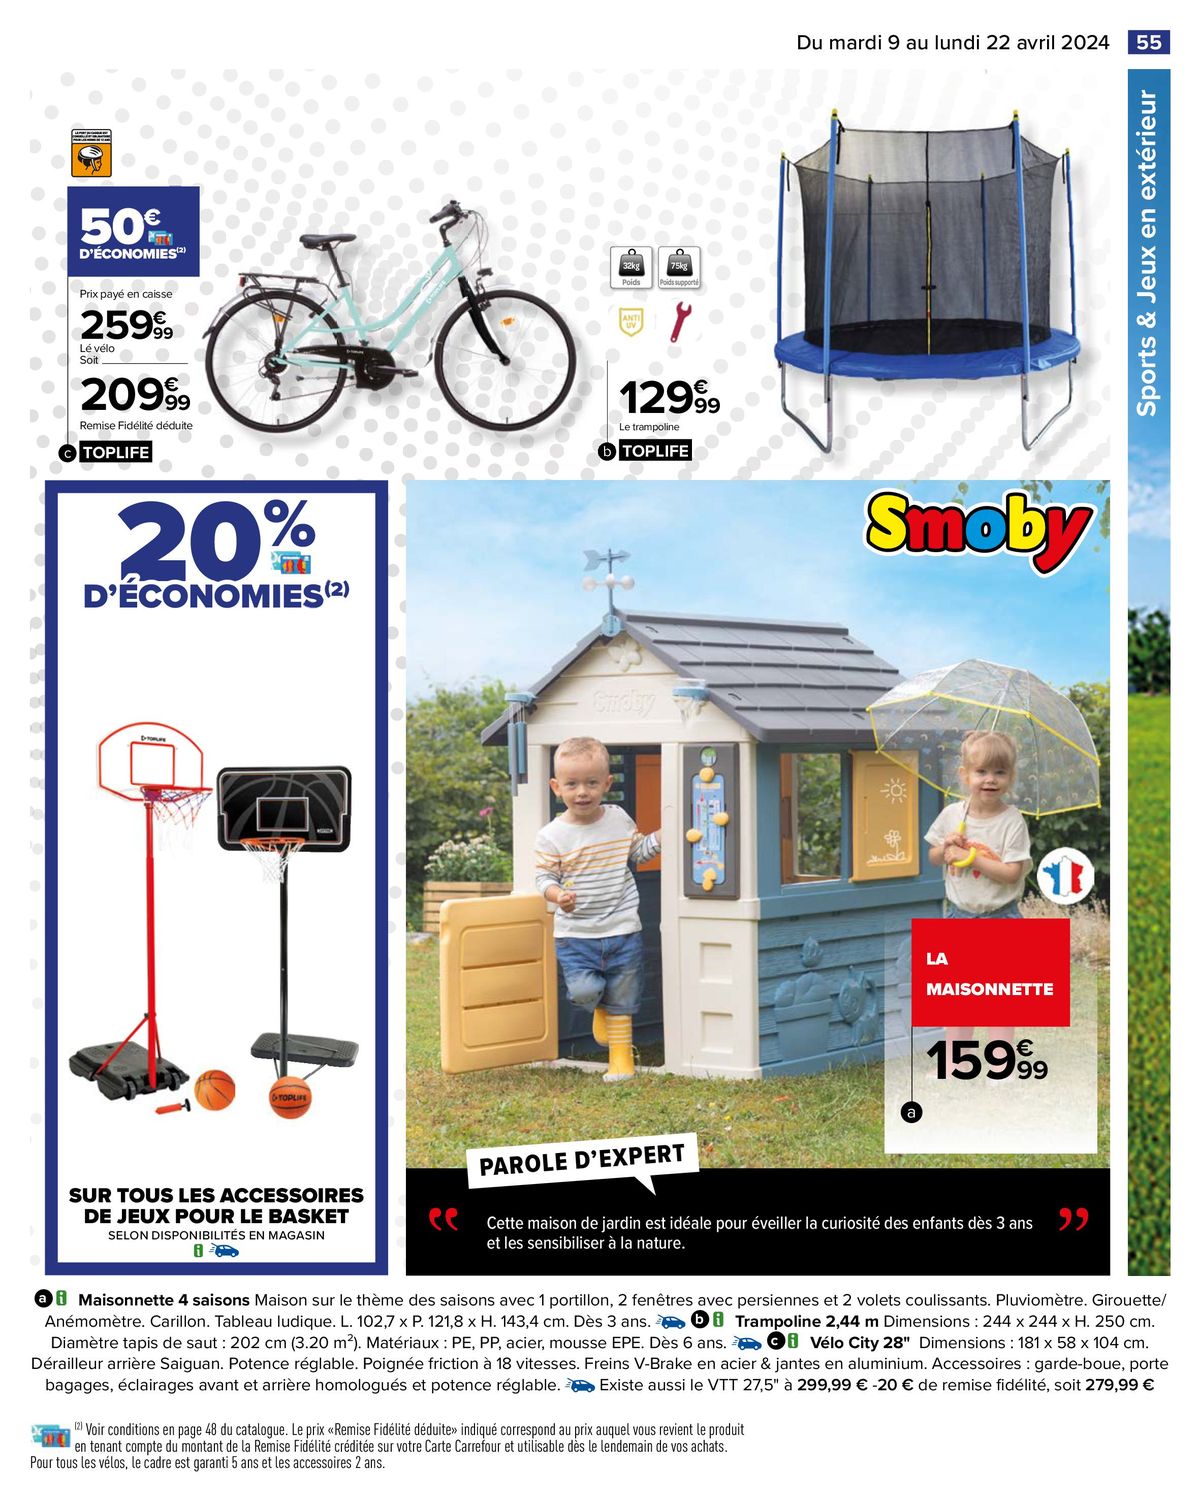 Catalogue OFFERT Carrefour Drive , page 00057